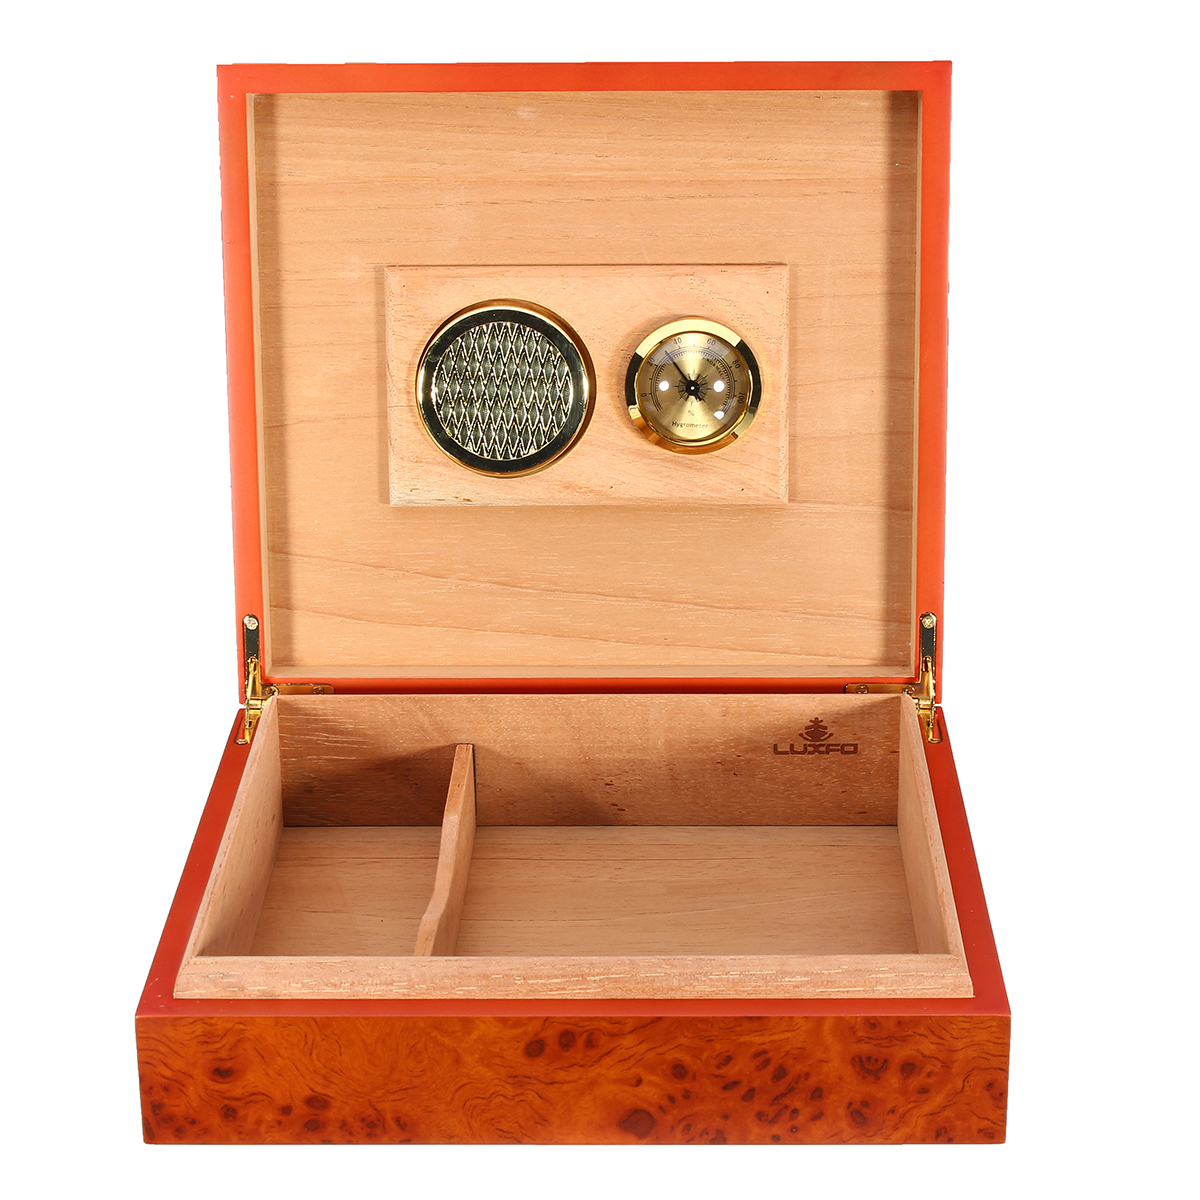 Desktop Cigar Humidor With Gold Plated Hygrometer • The